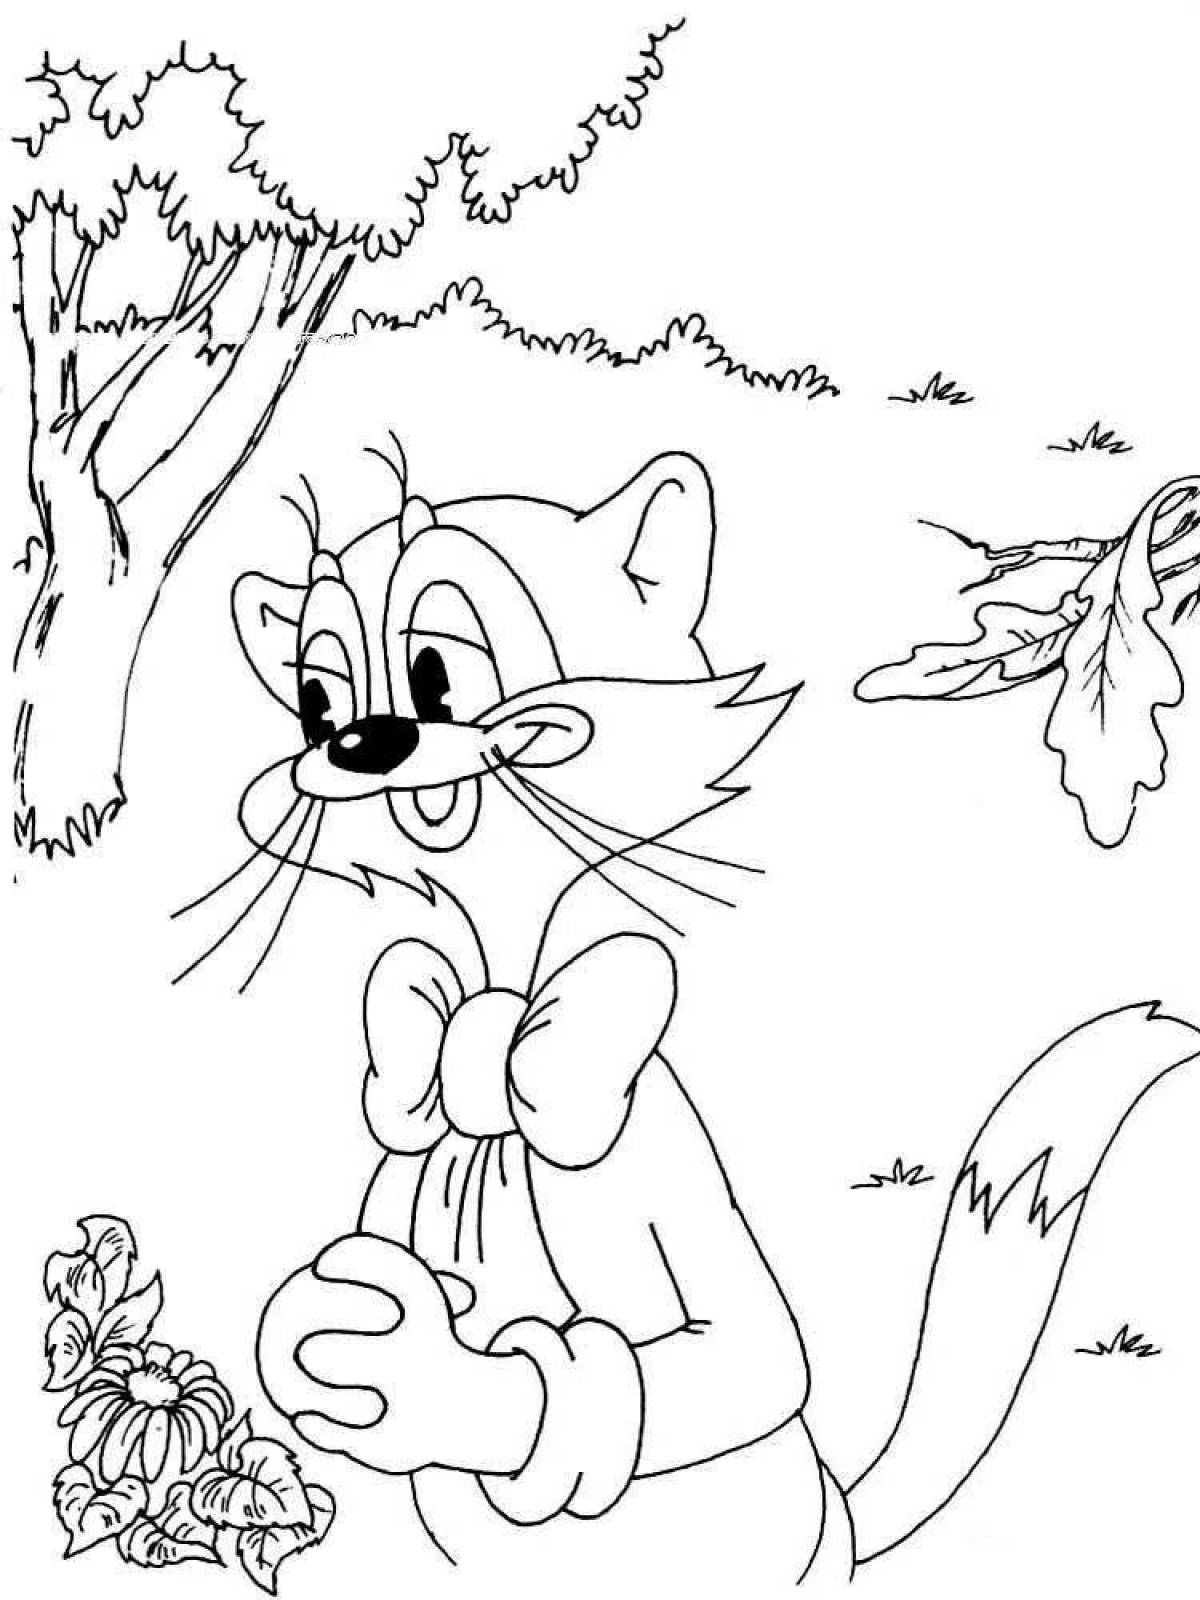 Exciting leopold cat coloring book